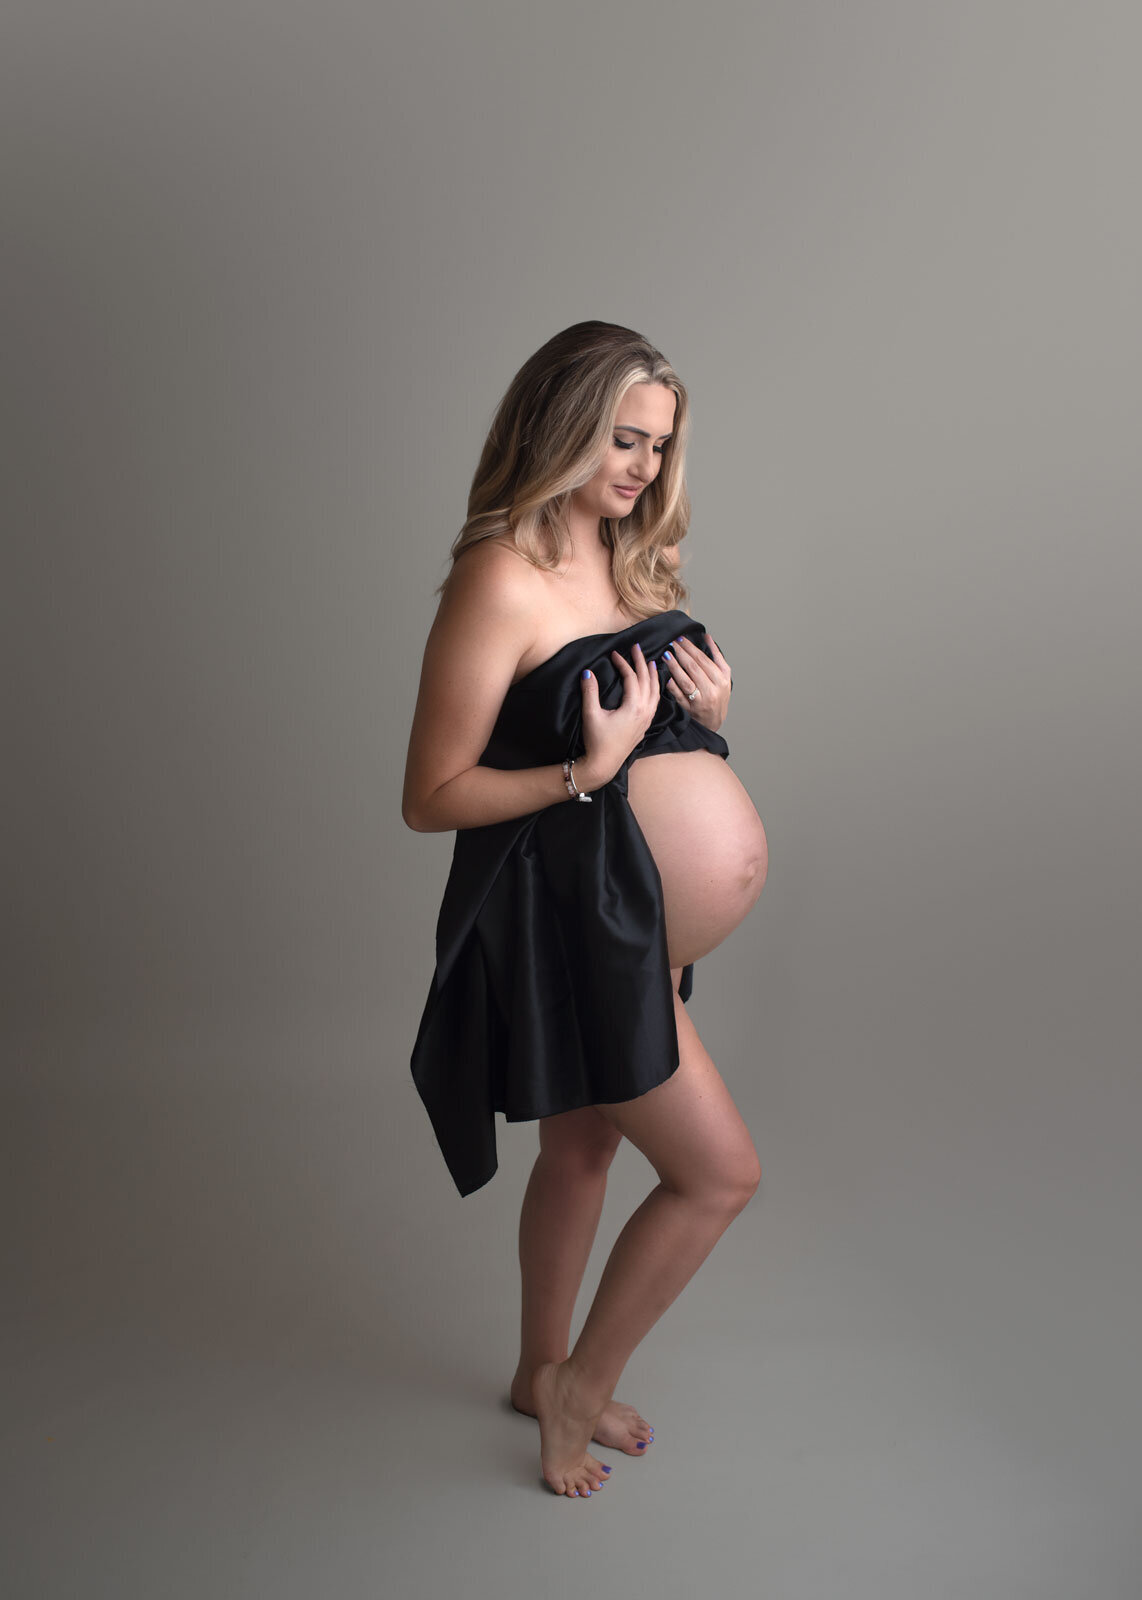 black fabric draped over pregnant woman at st. louis maternity photoshoot